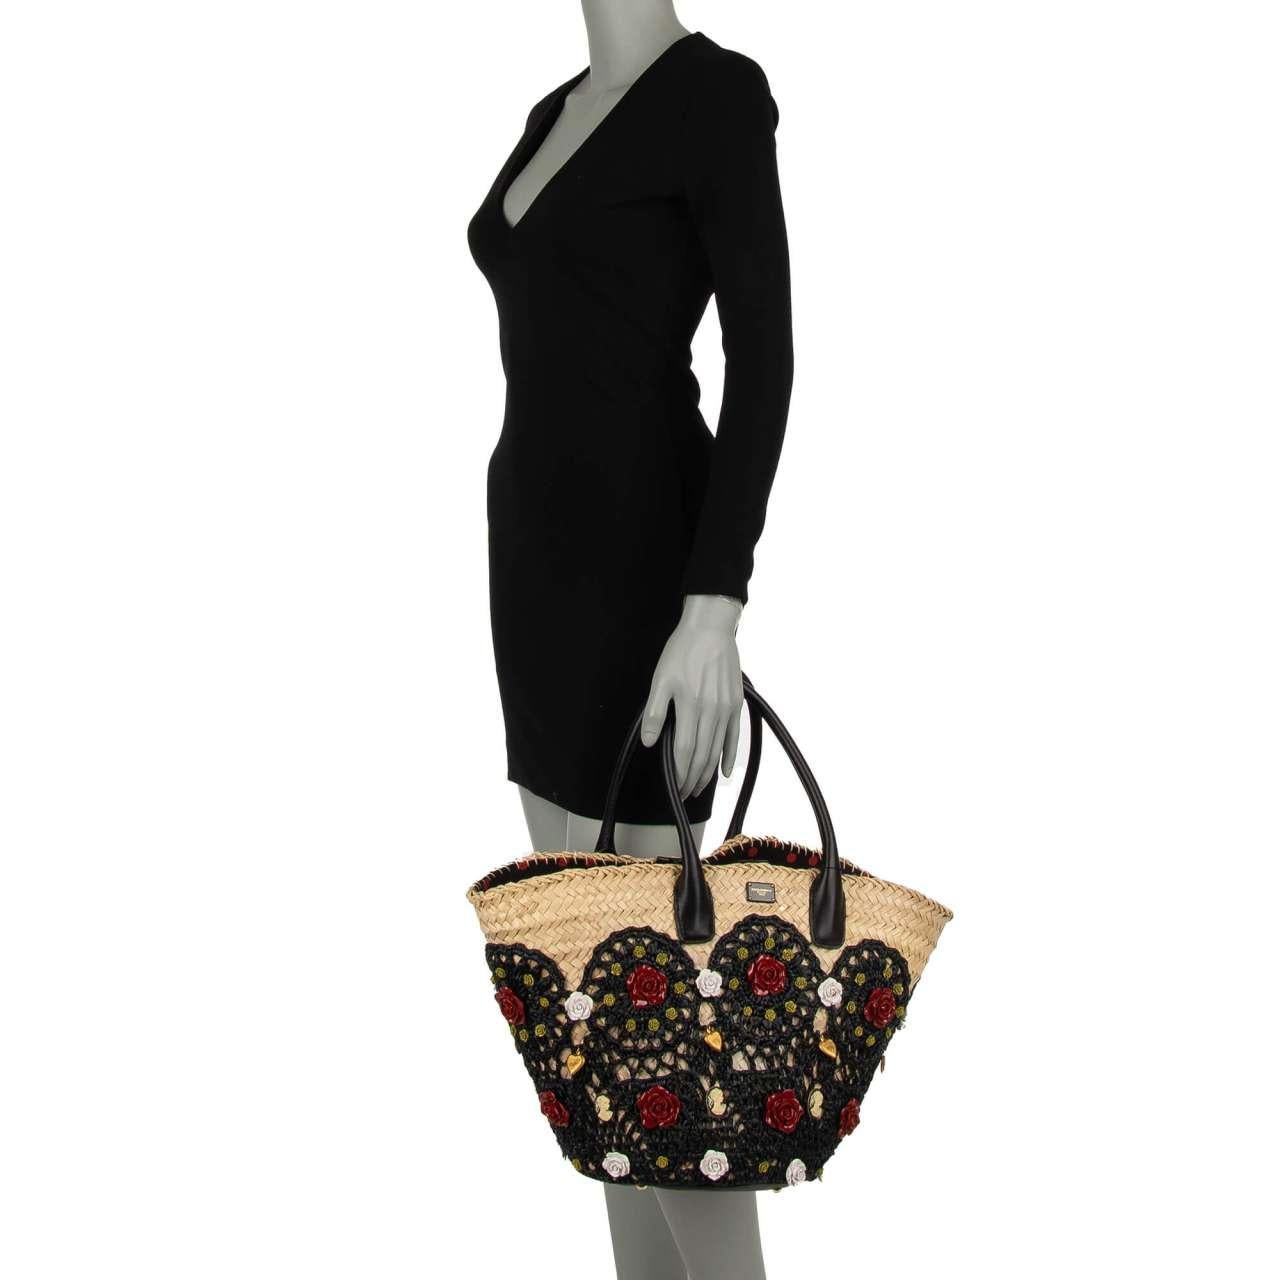 - Large Sicily style jeweled straw basket tote bag / beach bag KENDRA with double handles, logo plate, embellished with roses, brooches and heart pendants by DOLCE & GABBANA - New with Tag, Dustbag, Authenticity Card - Former RRP: EUR 3.750 - MADE